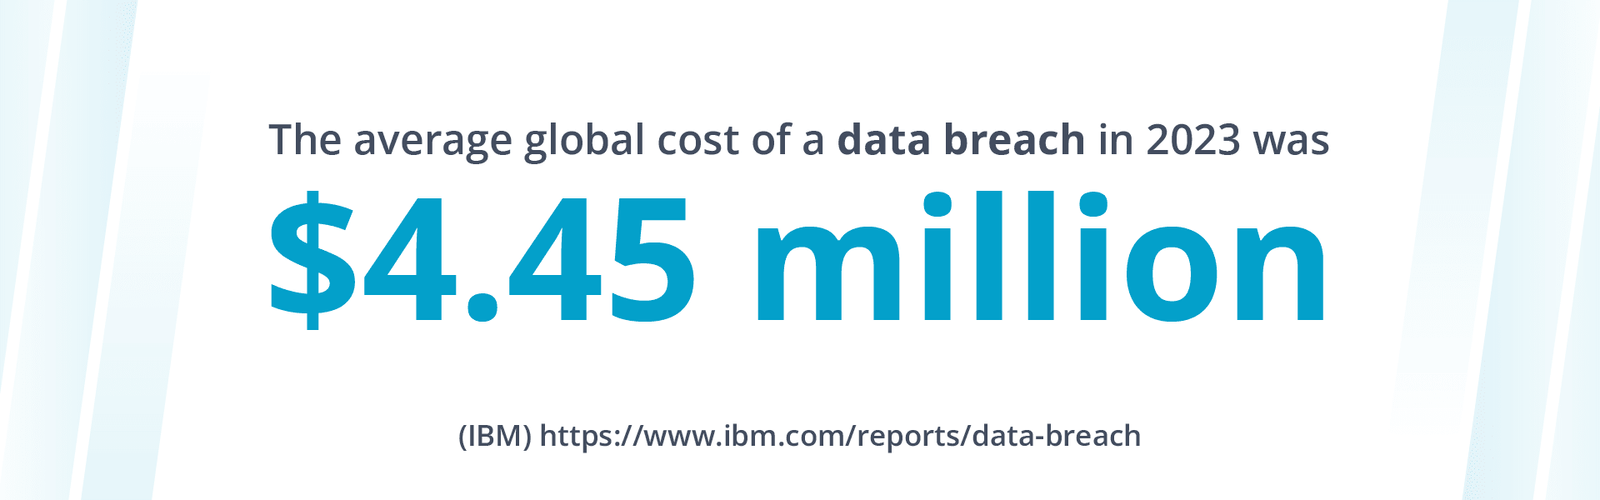 The average cost of a data breach in 2023.